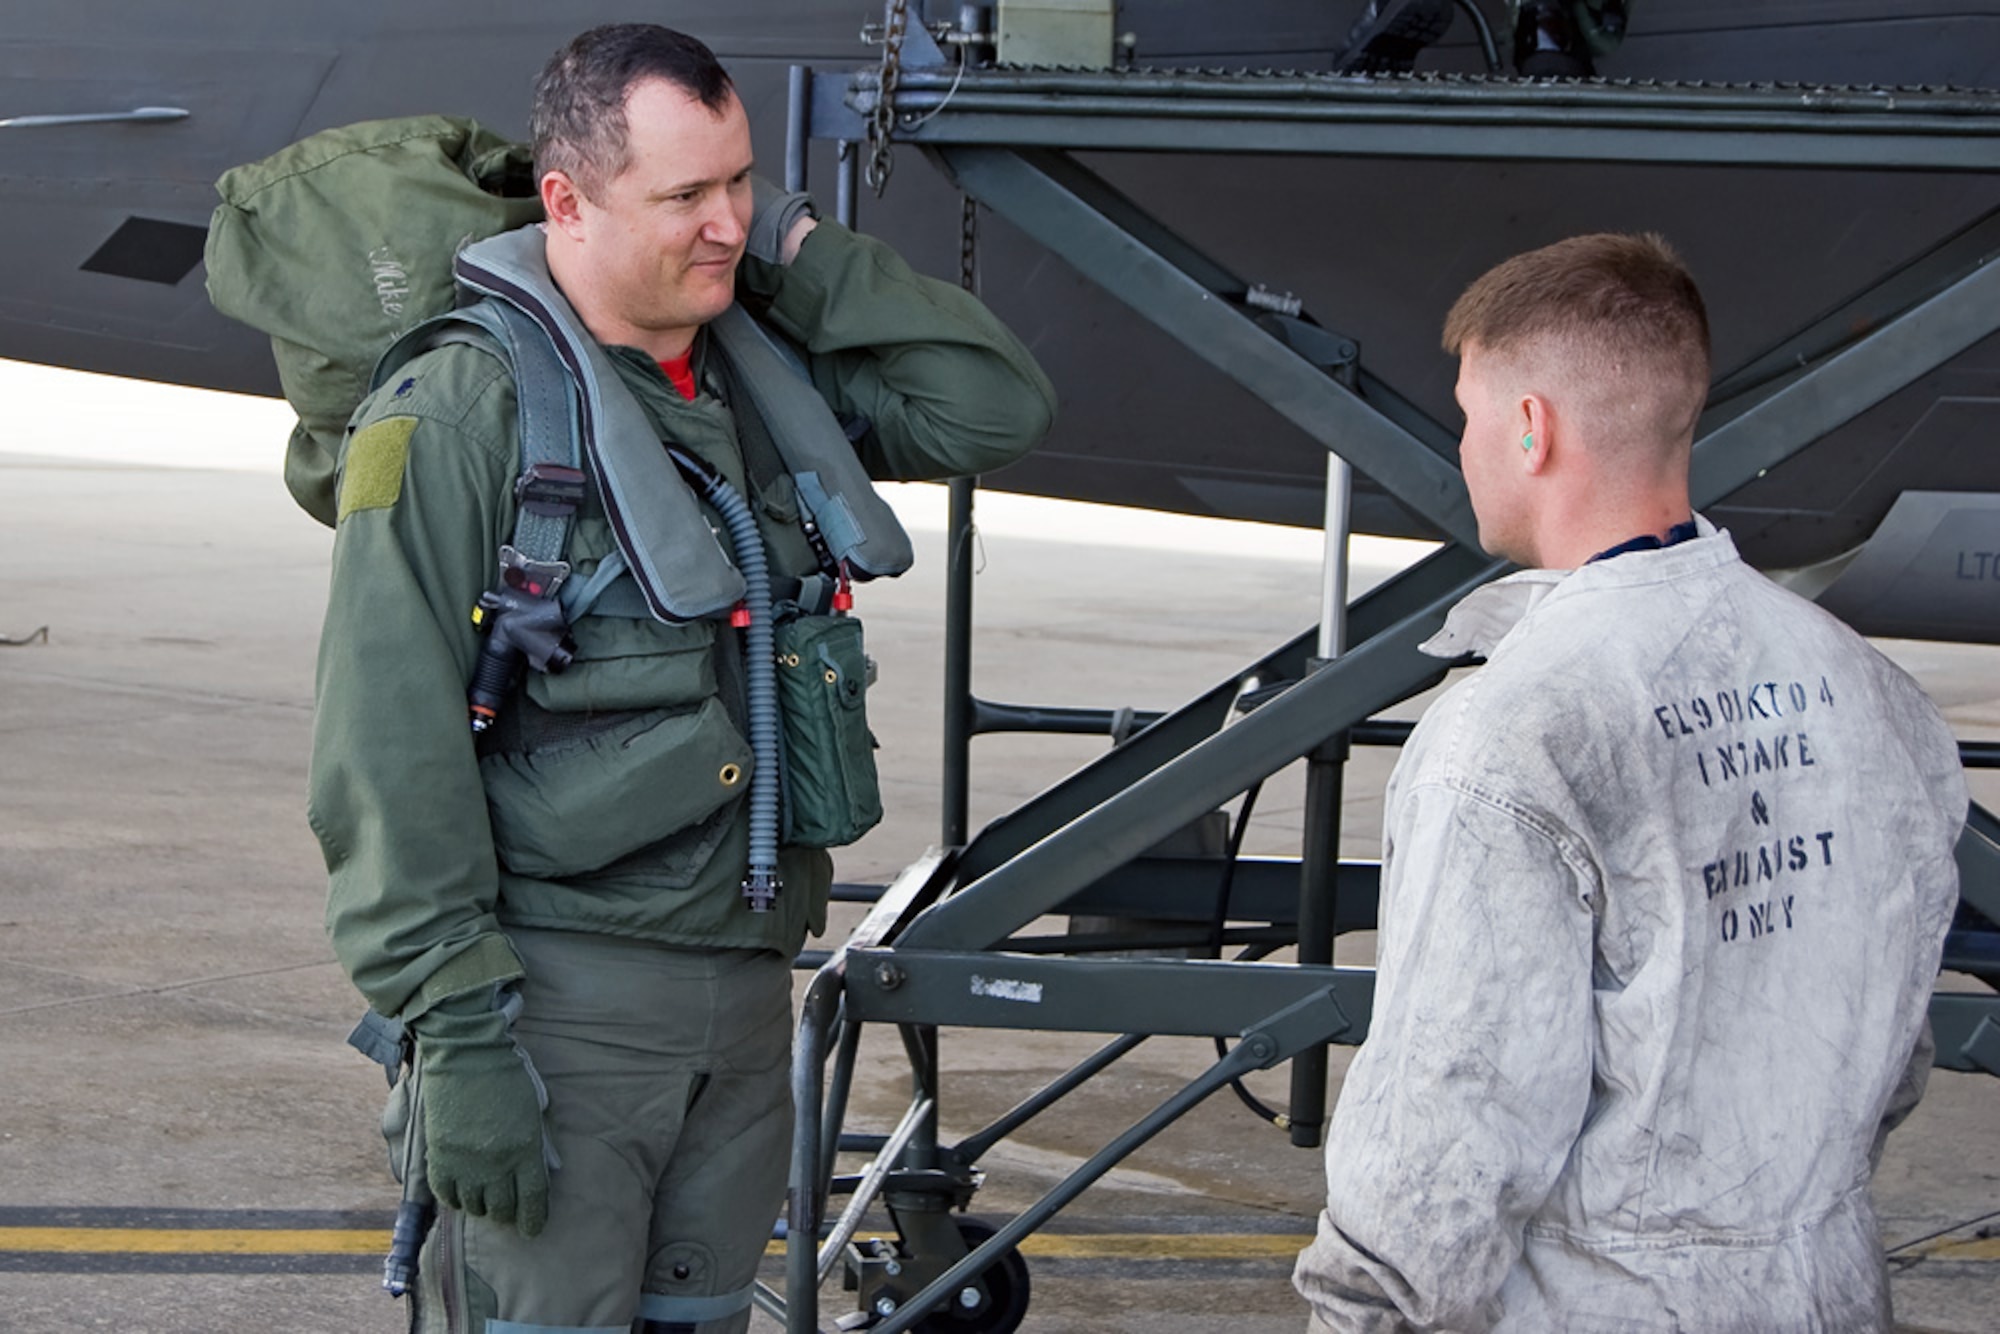 TYNDALL AIR FORCE BASE, Fla. -- Lt. Col. Mike Shower, 90th Fighter Squadron commander, speaks with Staff Sgt. Charlie Grantham, 90th Aircraft Maintenance Unit, after completing a training sortie. The 3rd Wing and Air Force Reserve Command's 477th Fighter Group combined for its first F-22A Raptor deployment to Tyndall Air Force Base, Fla., for Combat Archer. The successful integration of both reserve and active-duty Airmen was showcased Feb. 2-17, when approximately eight aircraft and 132 Airmen took part in the Weapons System Evaluation Program training. (Photo by Scott Wolfe)
